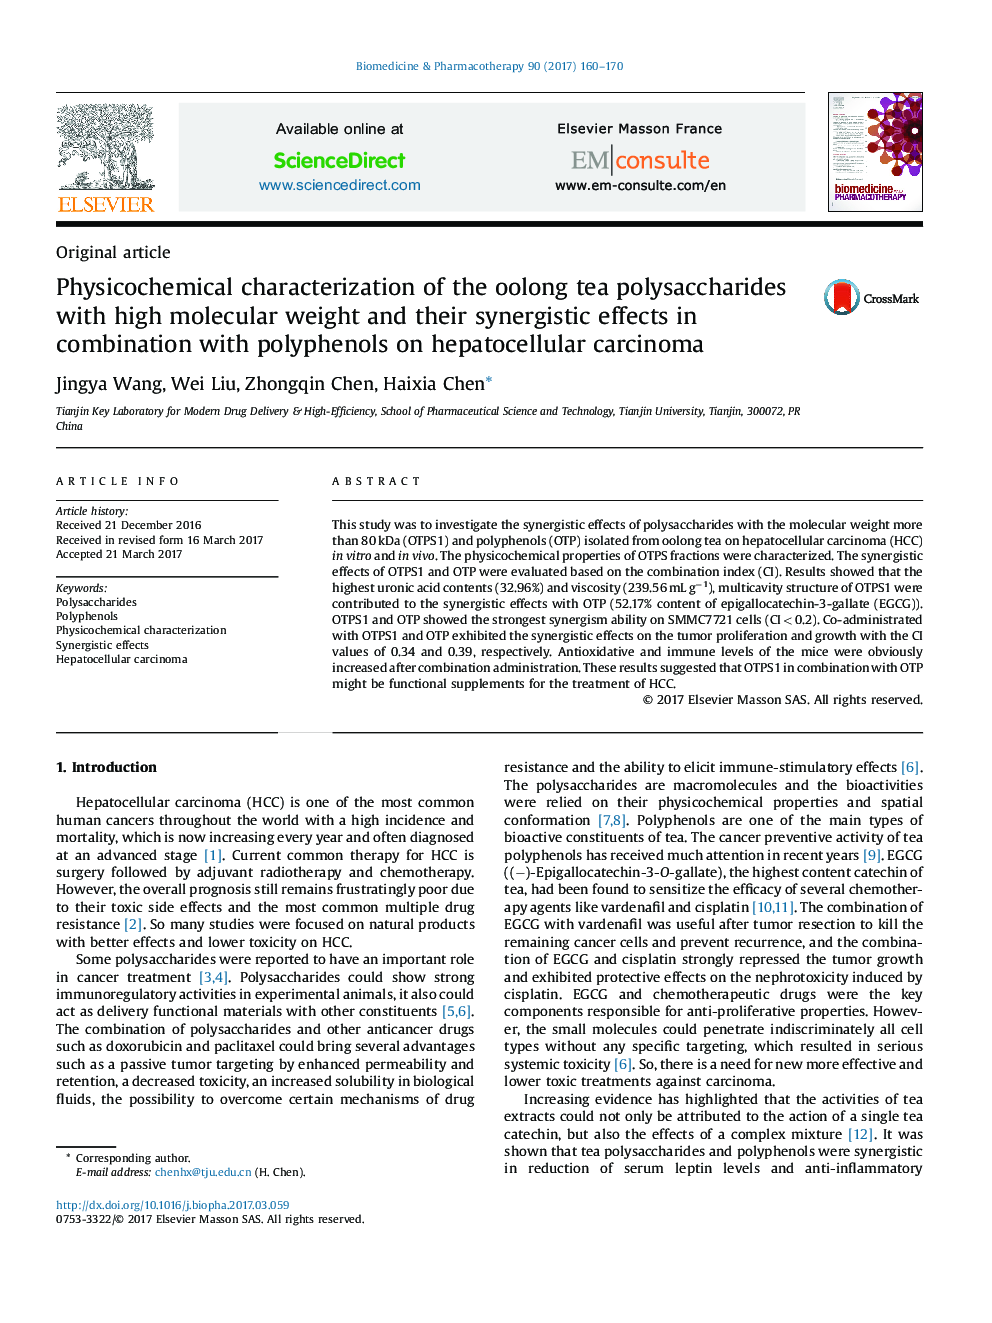 Physicochemical characterization of the oolong tea polysaccharides with high molecular weight and their synergistic effects in combination with polyphenols on hepatocellular carcinoma